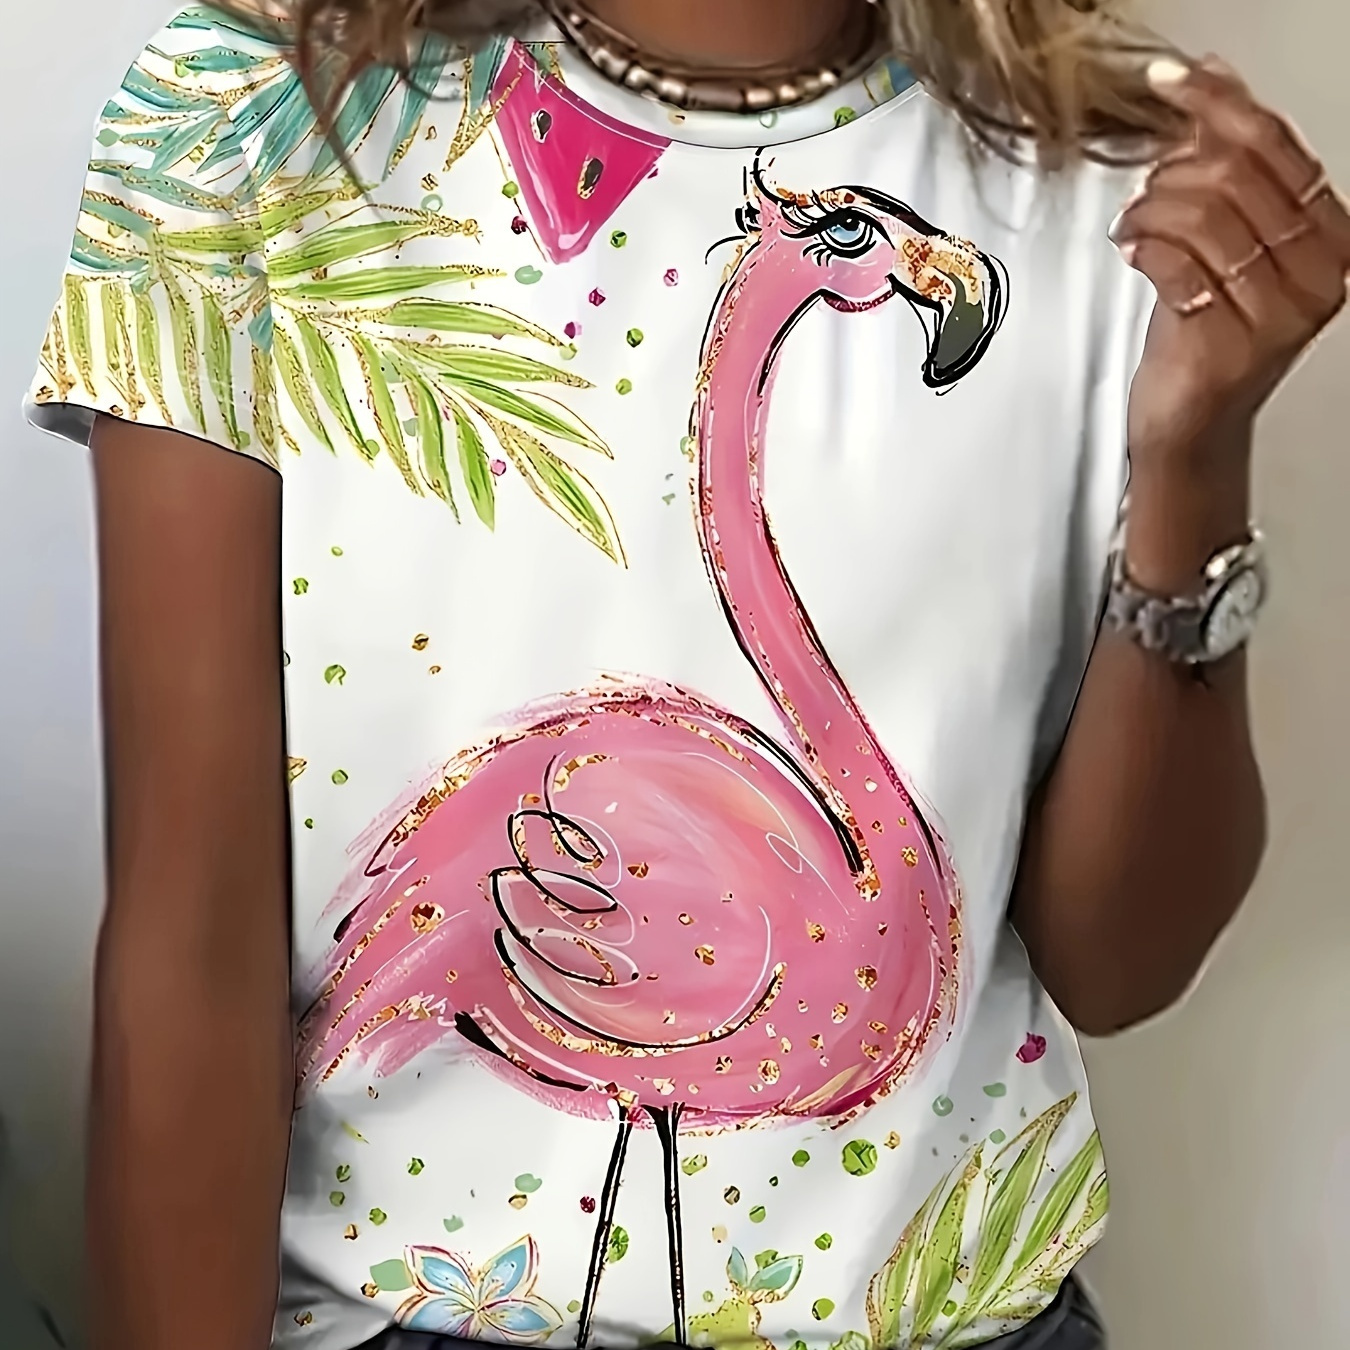 

Flamingo Print Crew Neck T-shirt, Casual Short Sleeve Top For Spring & Summer, Women's Clothing